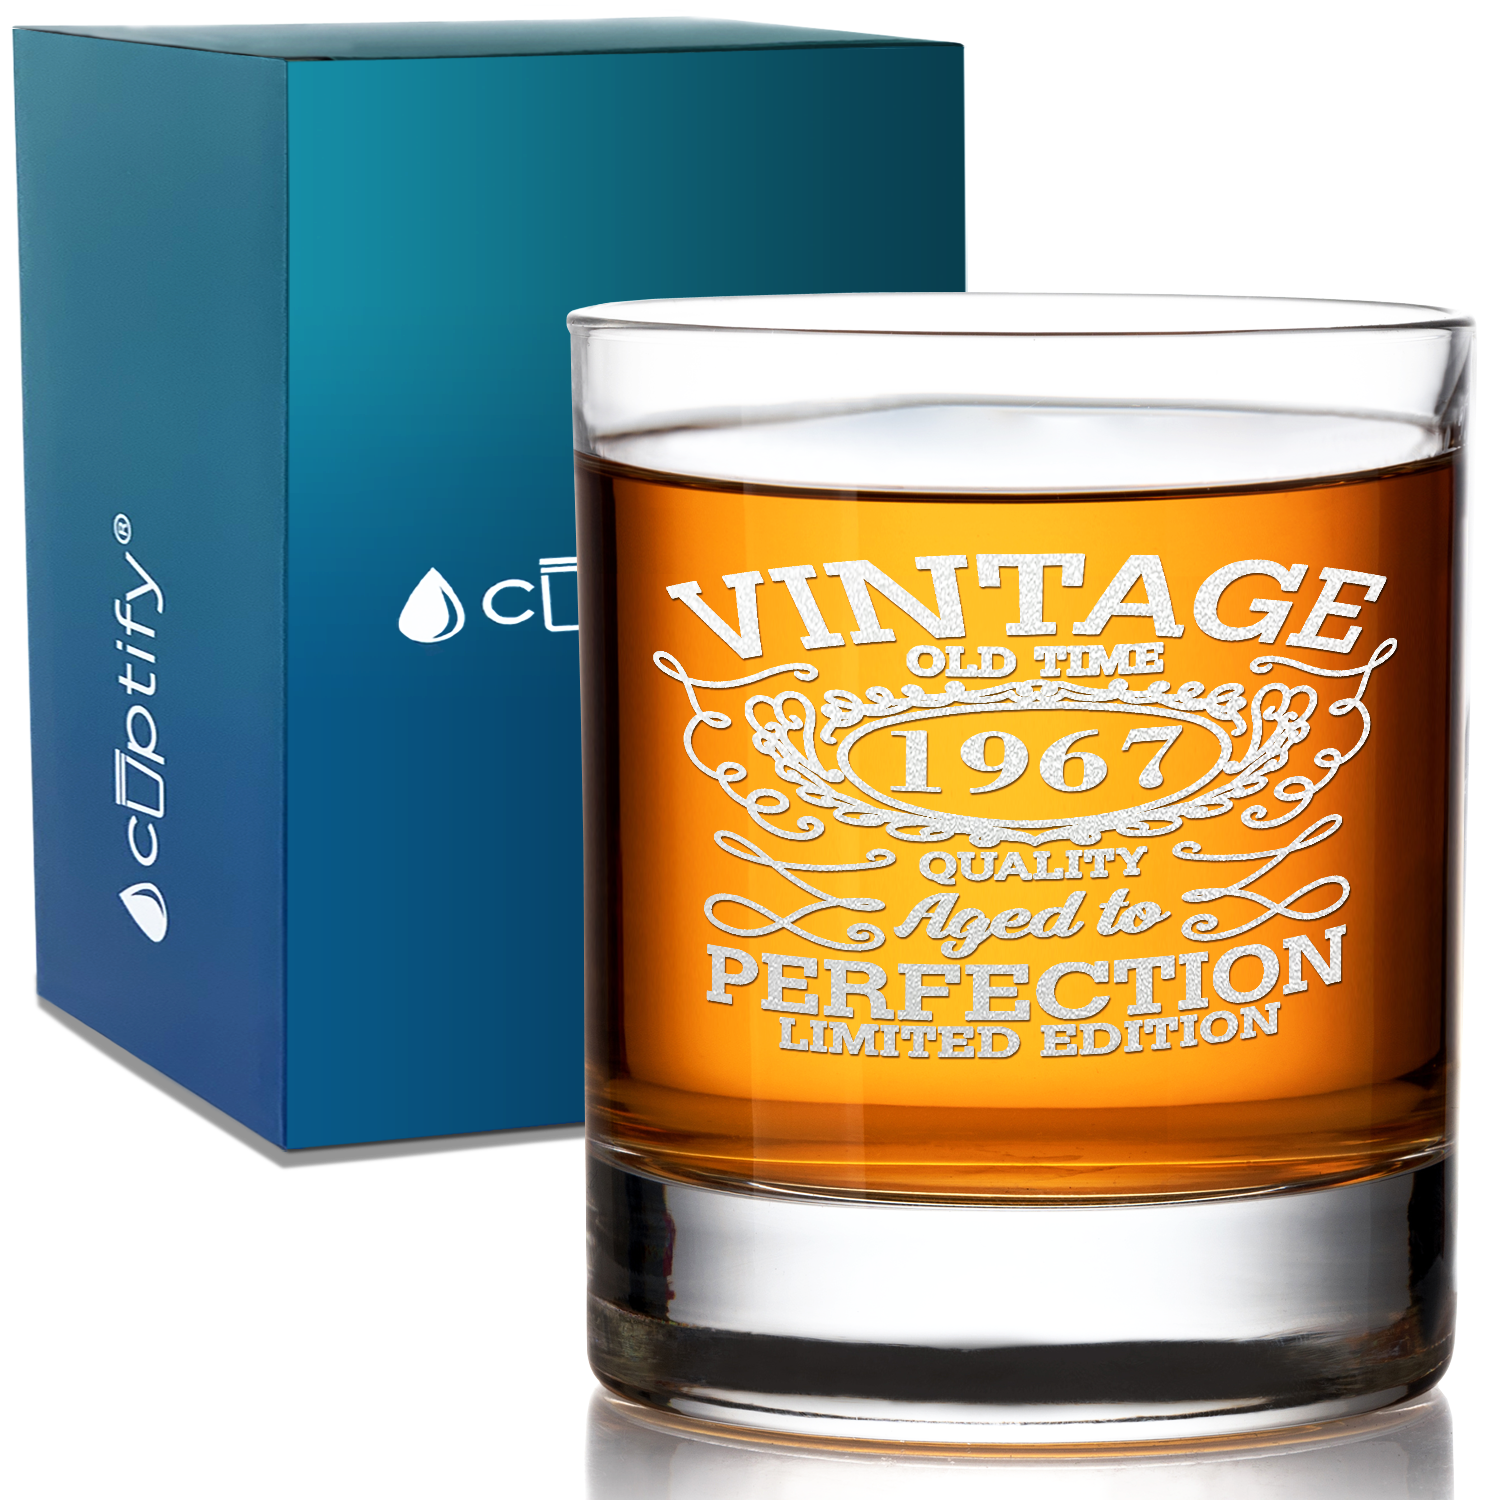 54th Birthday Vintage 54 Years Old Time 1967 Quality Laser Engraved 10.25oz Old Fashion Glass